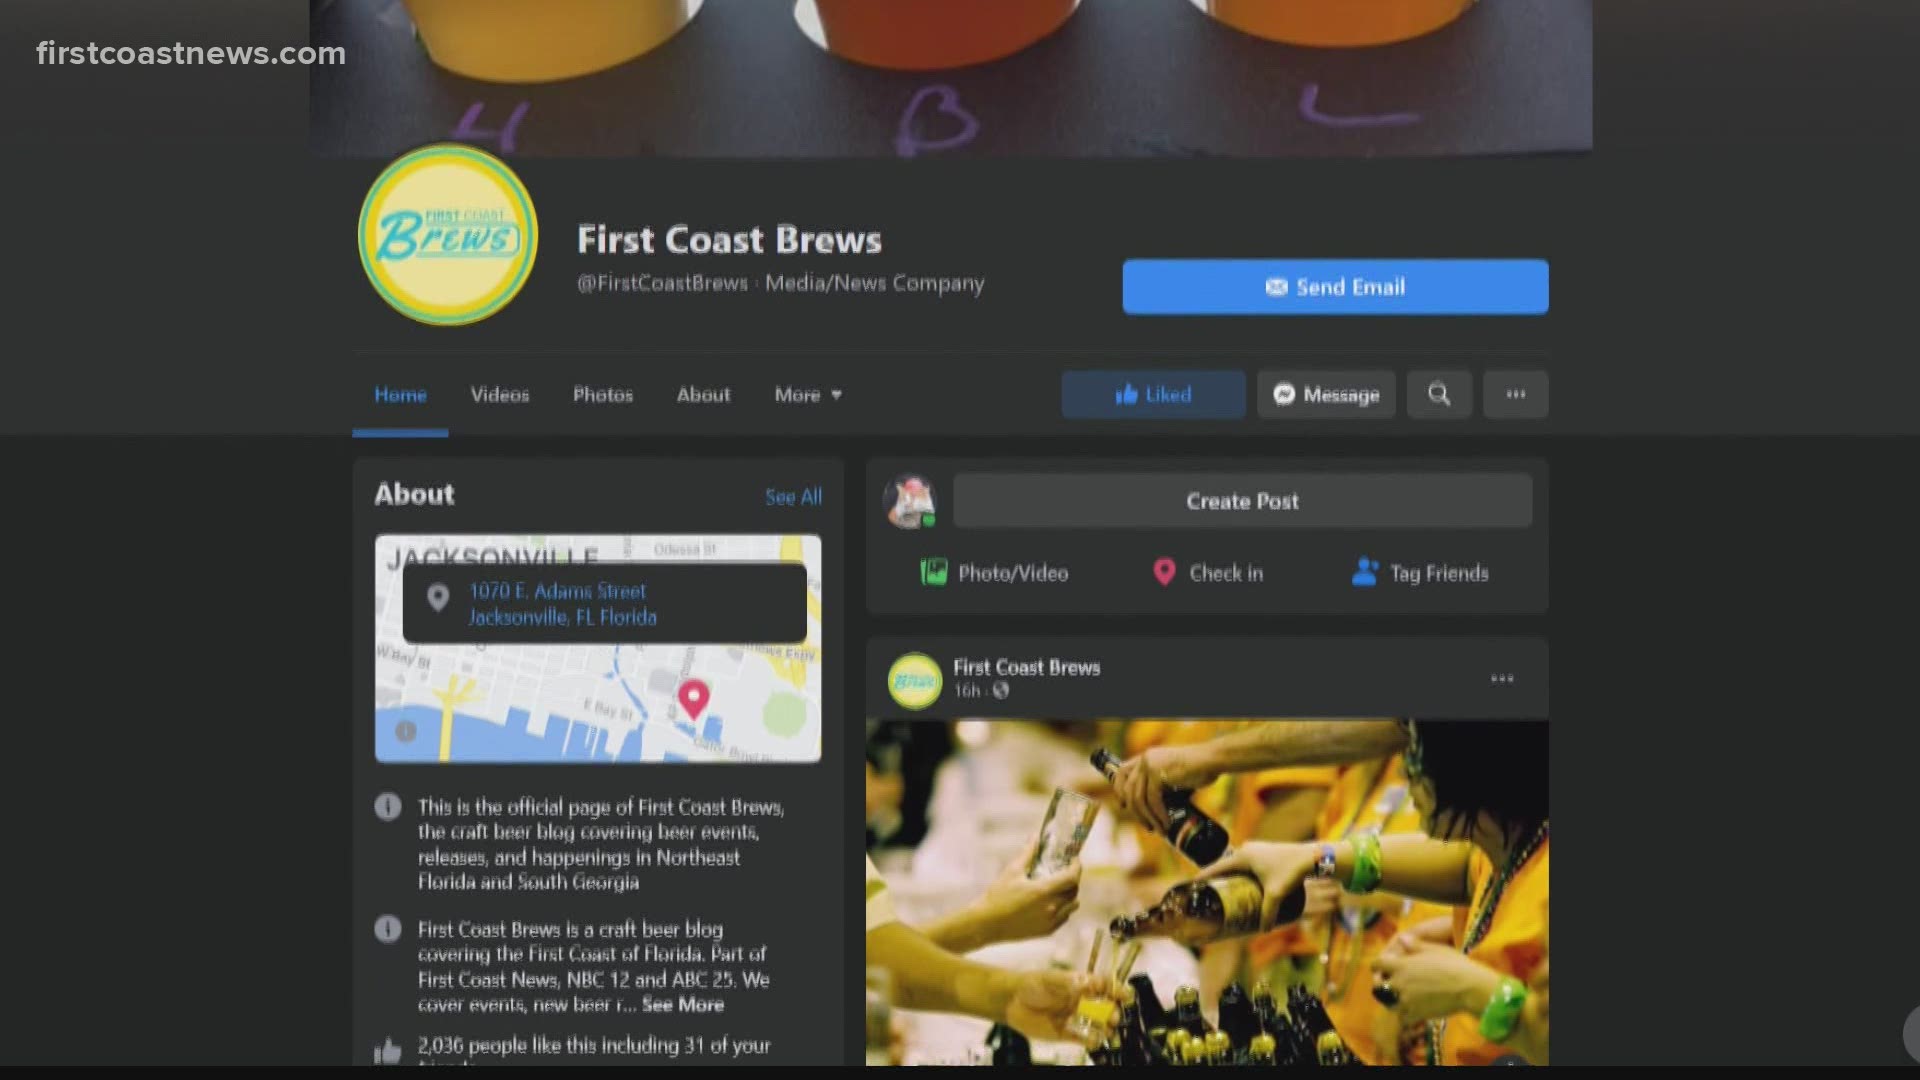 Check out First Coast Brews on Facebook.